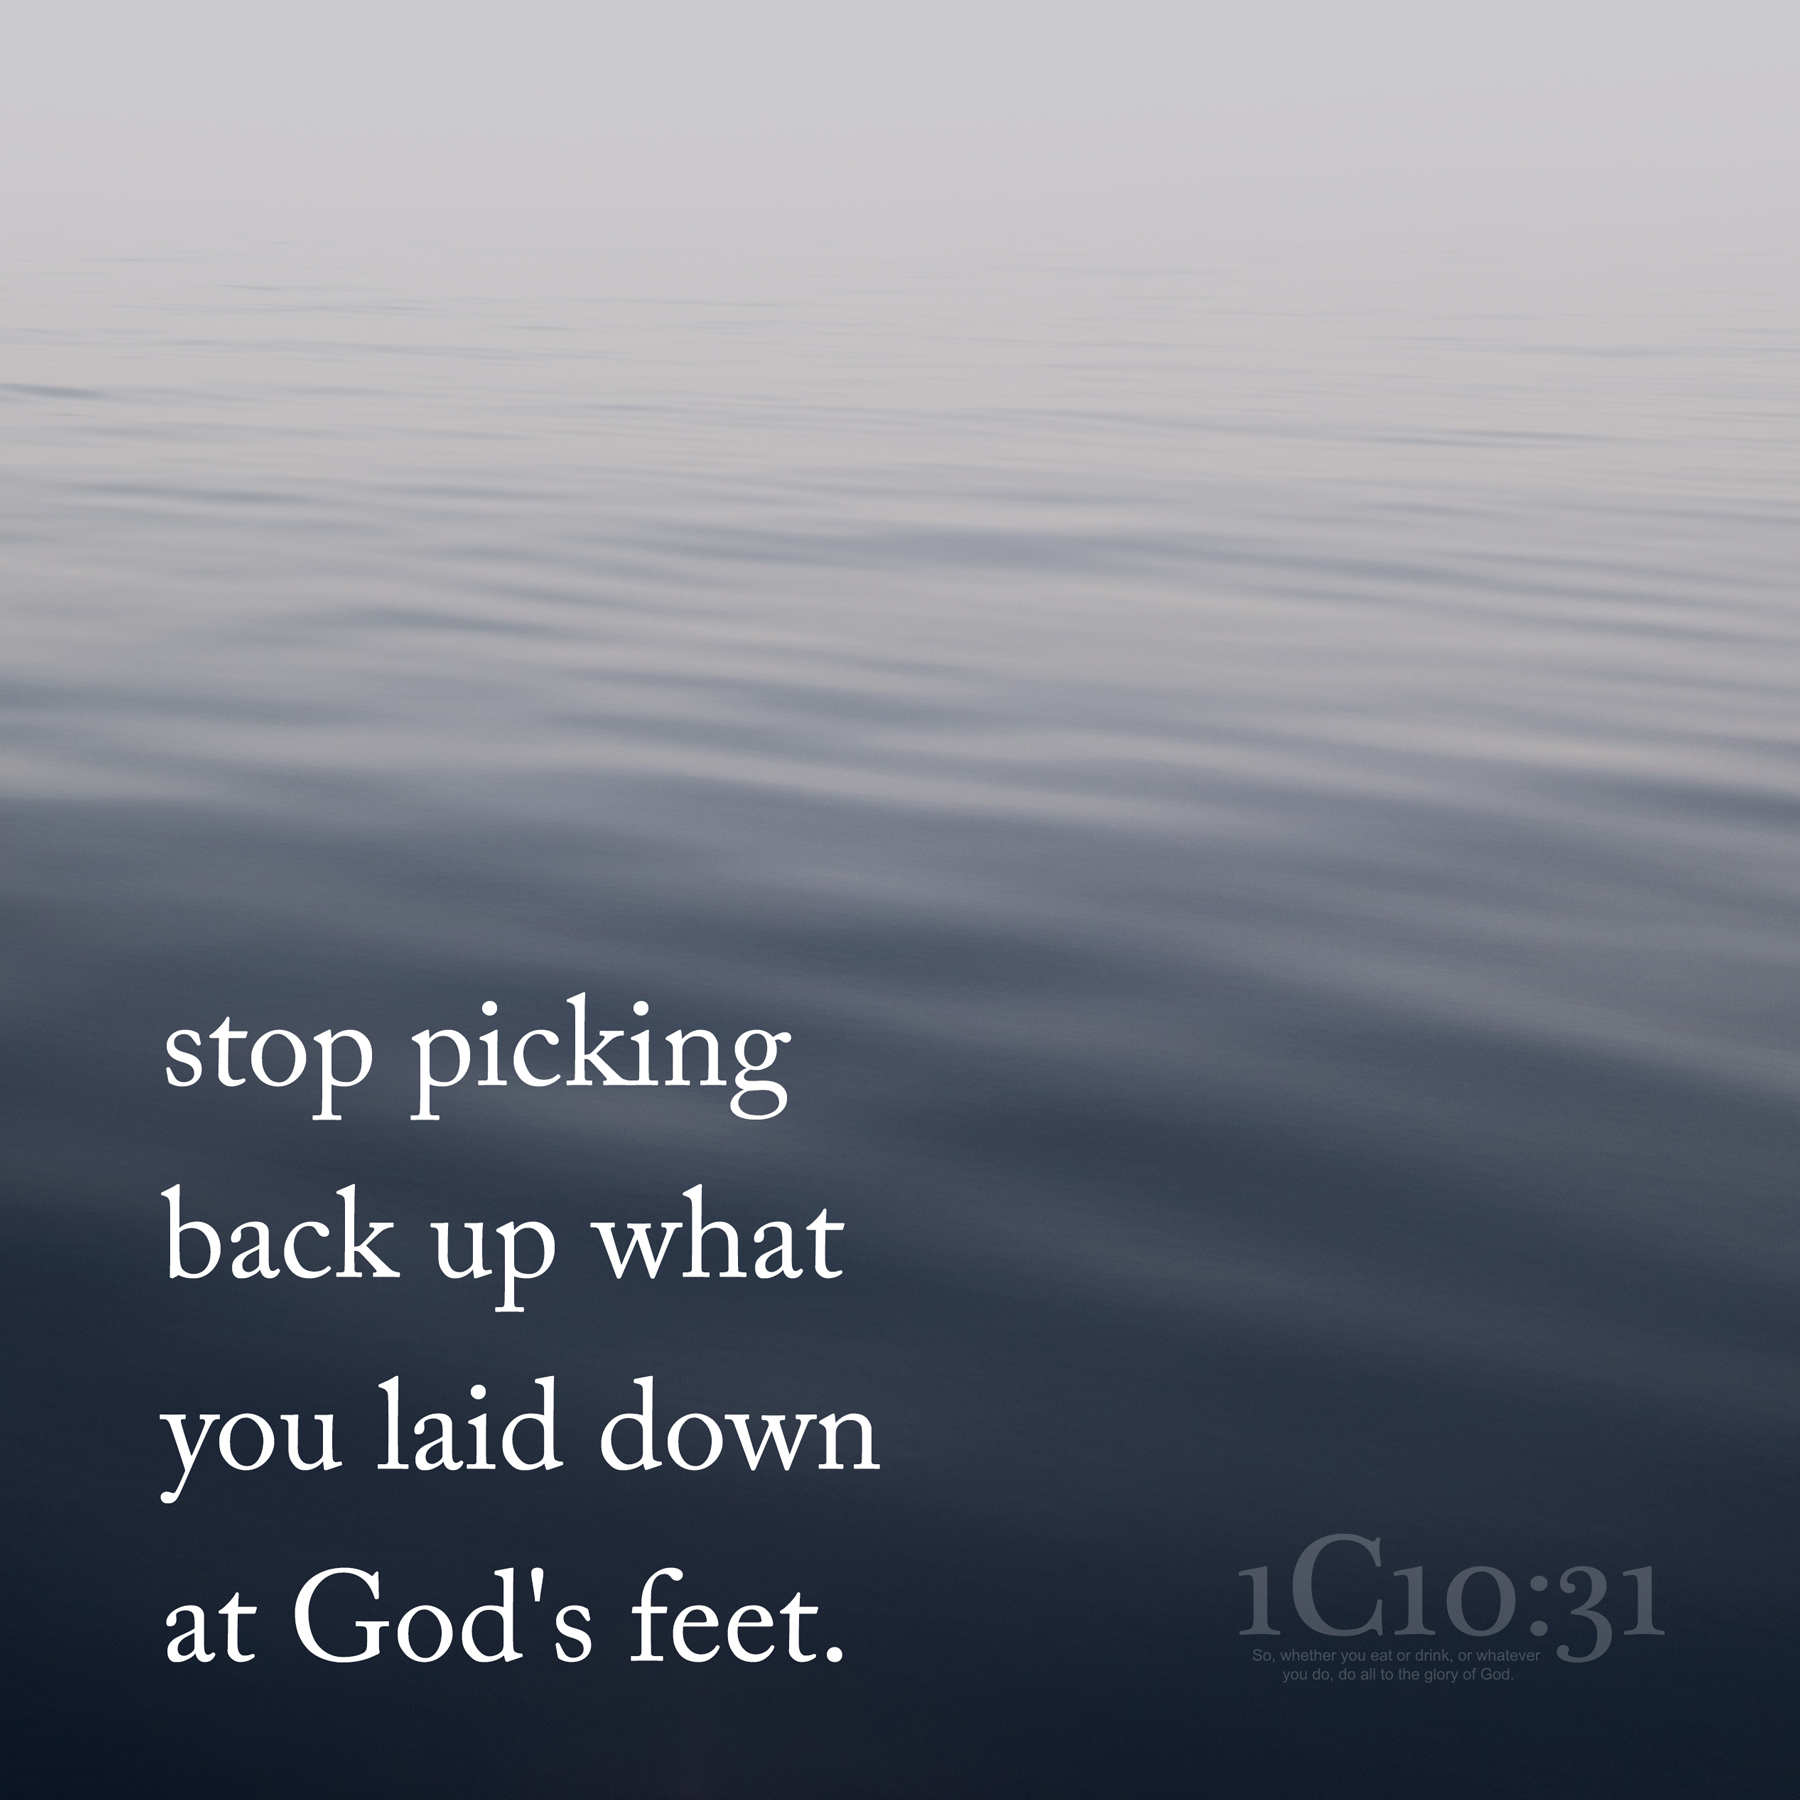 Stop picking back up what you laid down at God's feet.